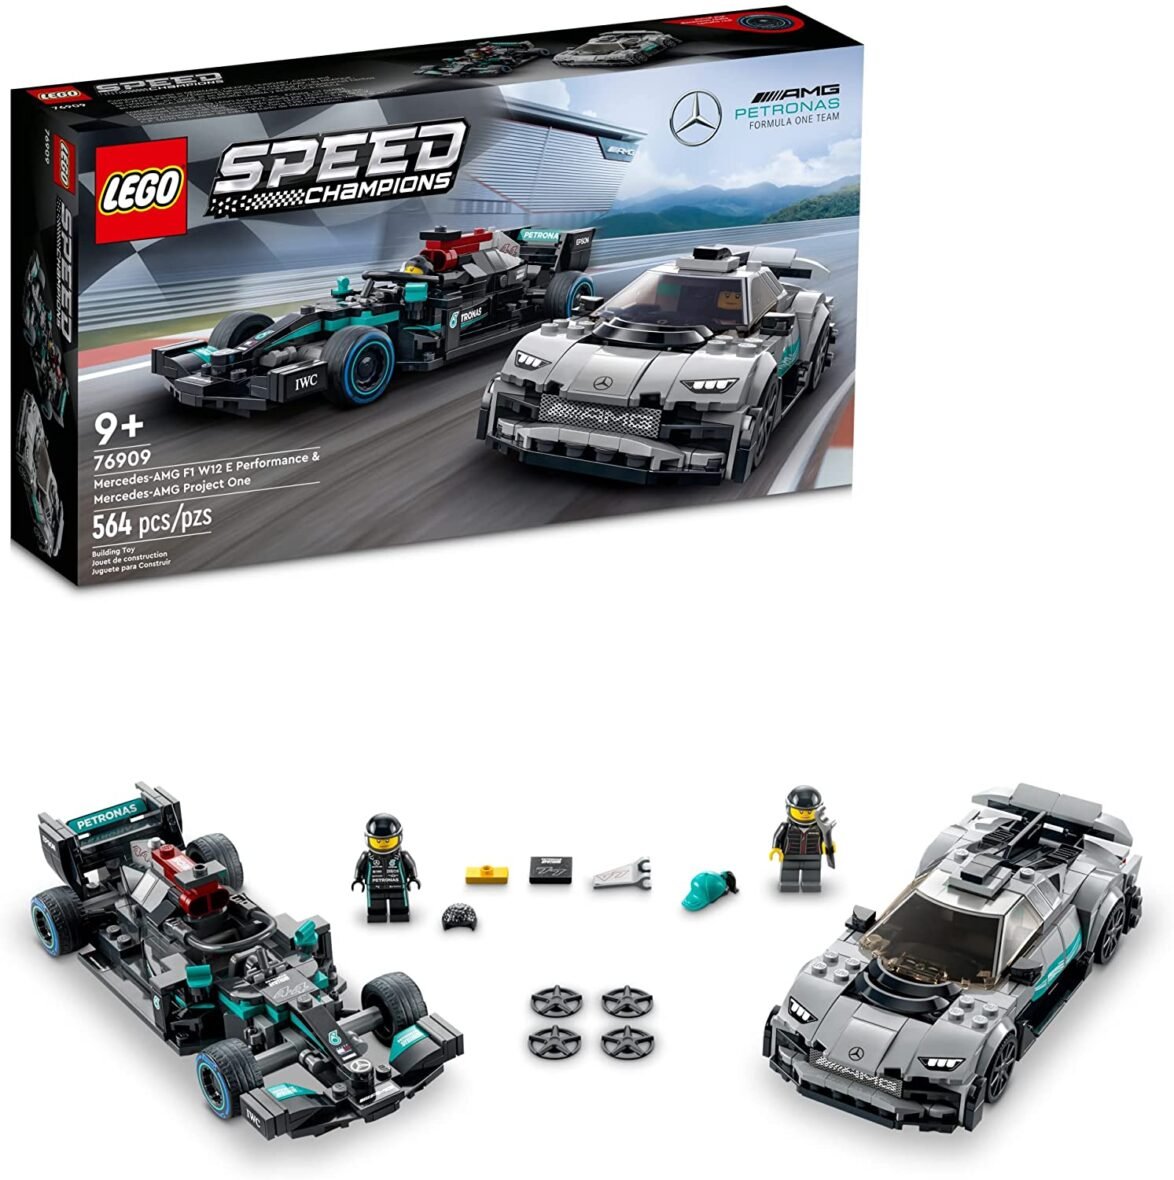 LEGO Speed Champions Mercedes-AMG F1 W12 E Performance & Mercedes-AMG Project One 76909 Building Kit (564 Pieces)